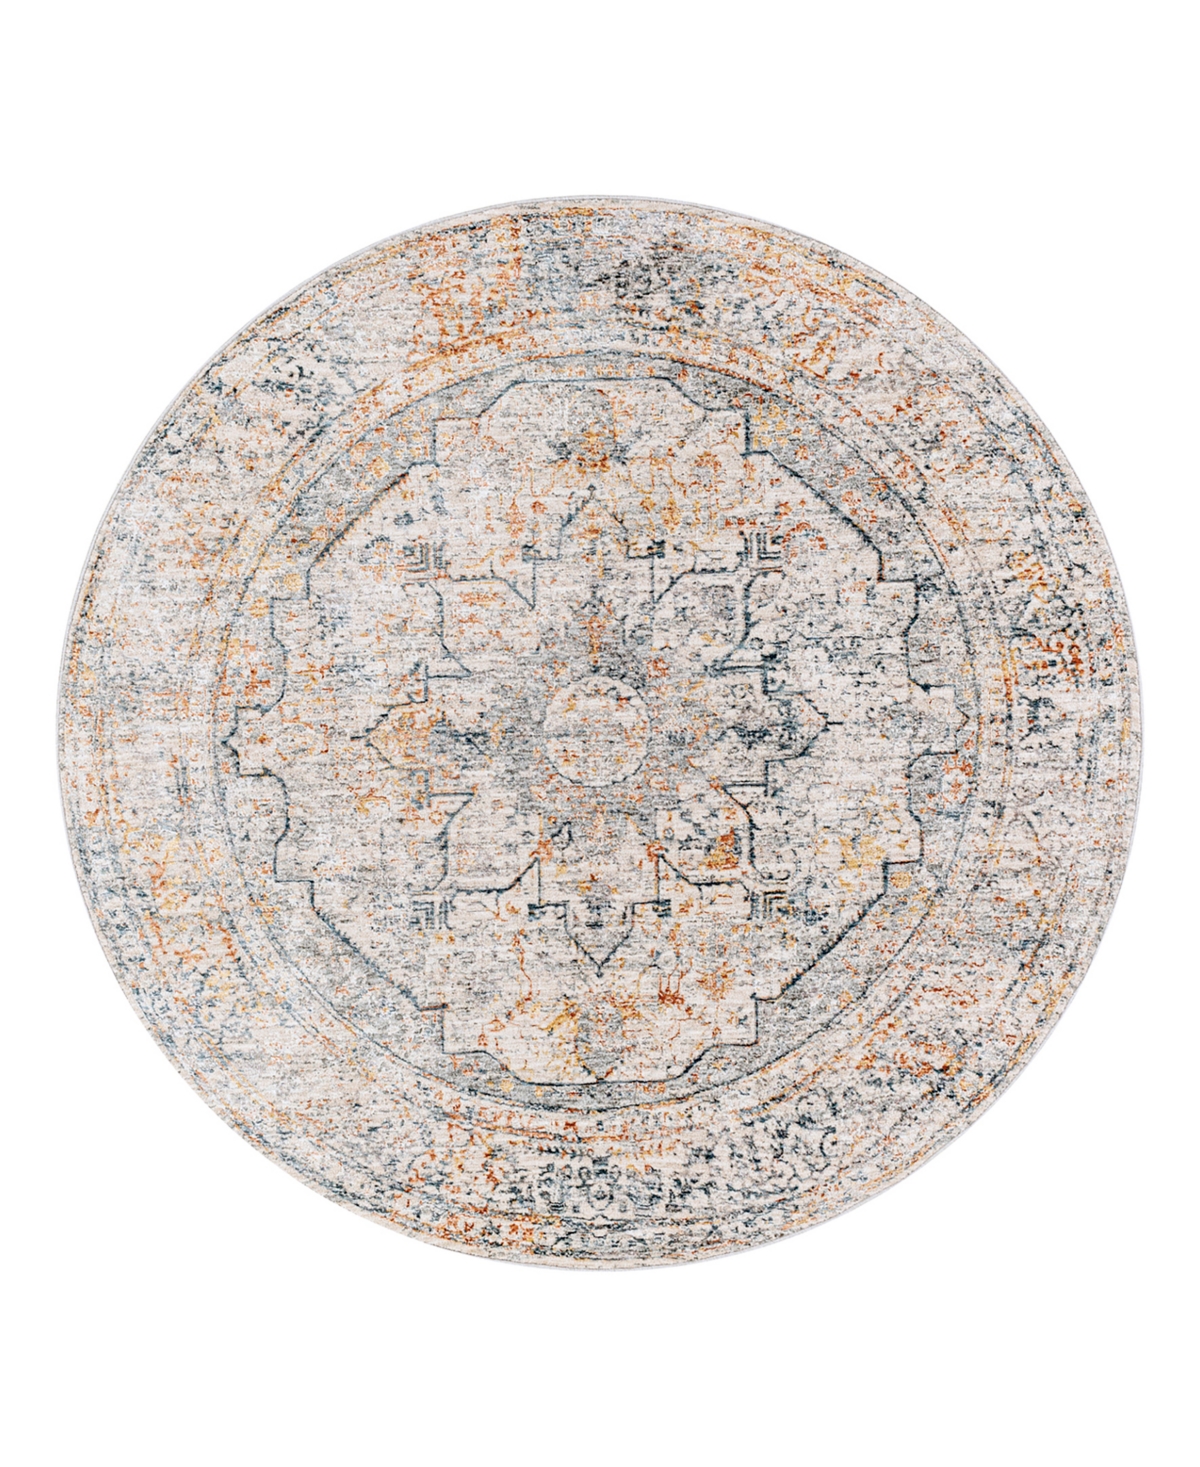 Shop Surya Laila Laa-2310 7'10x7'10 Round Area Rug In Silver